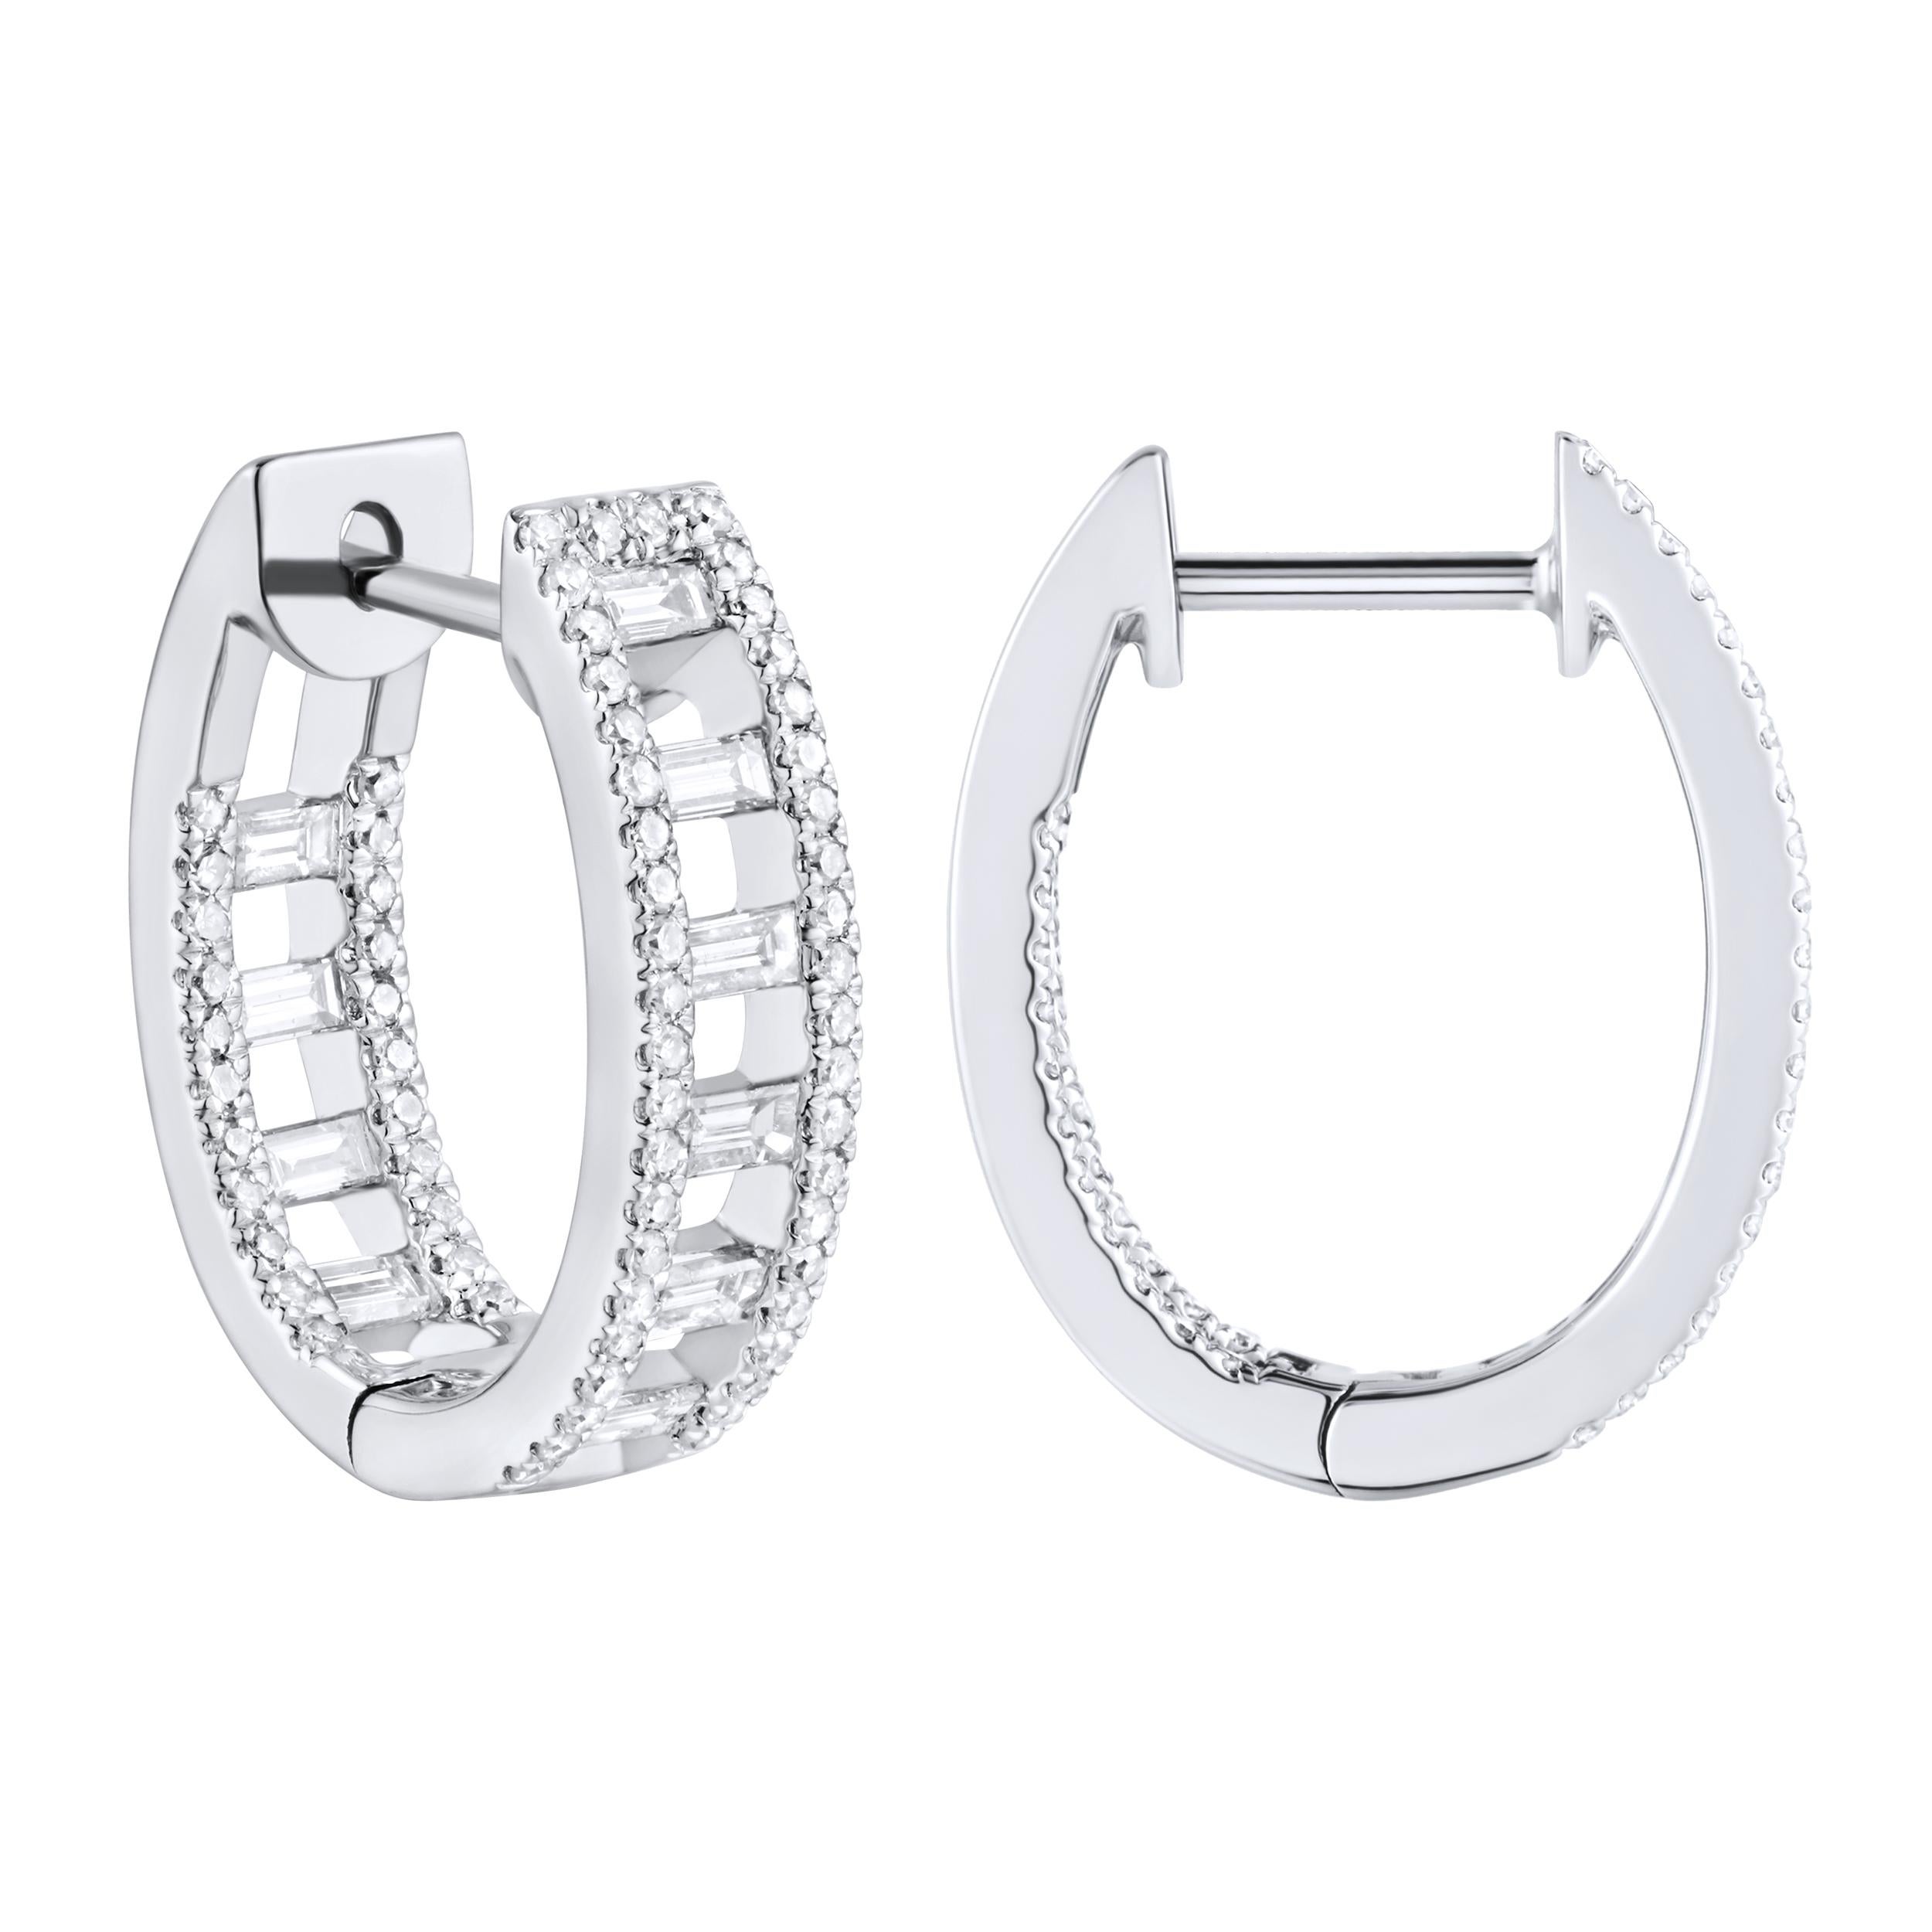 14K White Gold Diamond Earrings featuring 0.38 Carats of Diamonds

Underline your look with this sharp 14K White gold shape Diamond Earrings. High quality Diamonds. This Earrings will underline your exquisite look for any occasion.

. is a leading